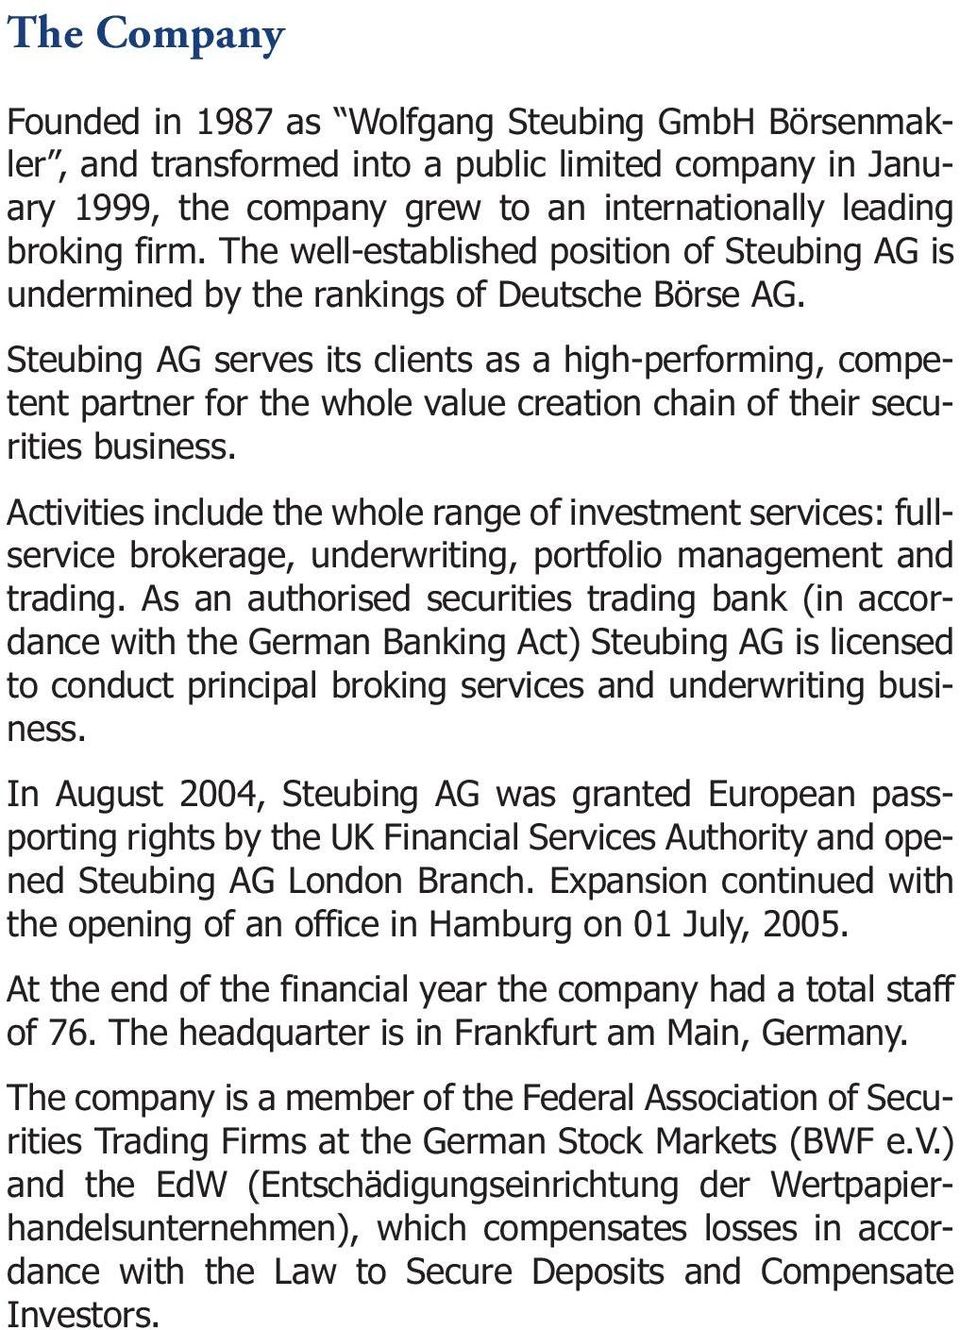 Steubing AG serves its clients as a high-performing, competent partner for the whole value creation chain of their securities business.